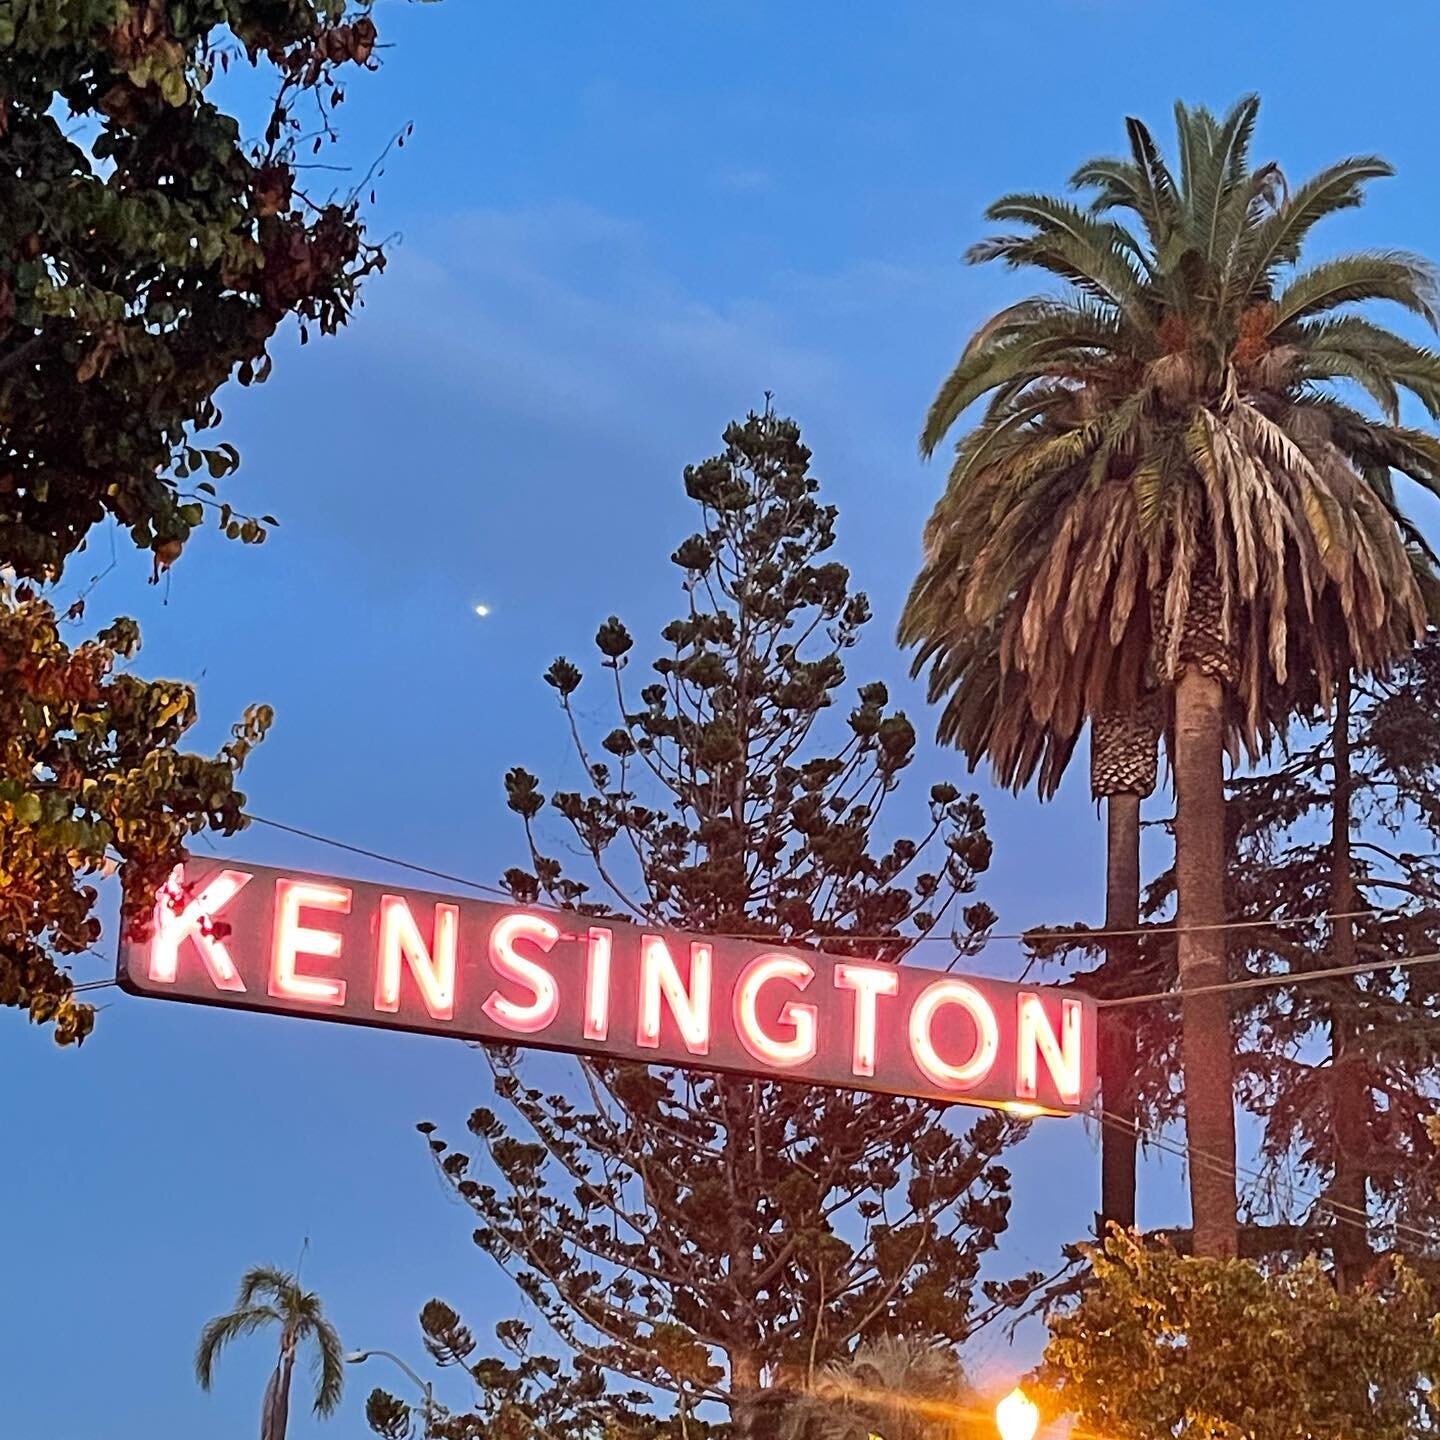 Kensington: My neighborhood in San Diego. It&rsquo;s one of the few walking neighborhoods in San Diego and the local free weekly, San Diego Reader, called it the last real neighborhood in SD. It&rsquo;s isolated, a neighborhood dead end, by a canyon,